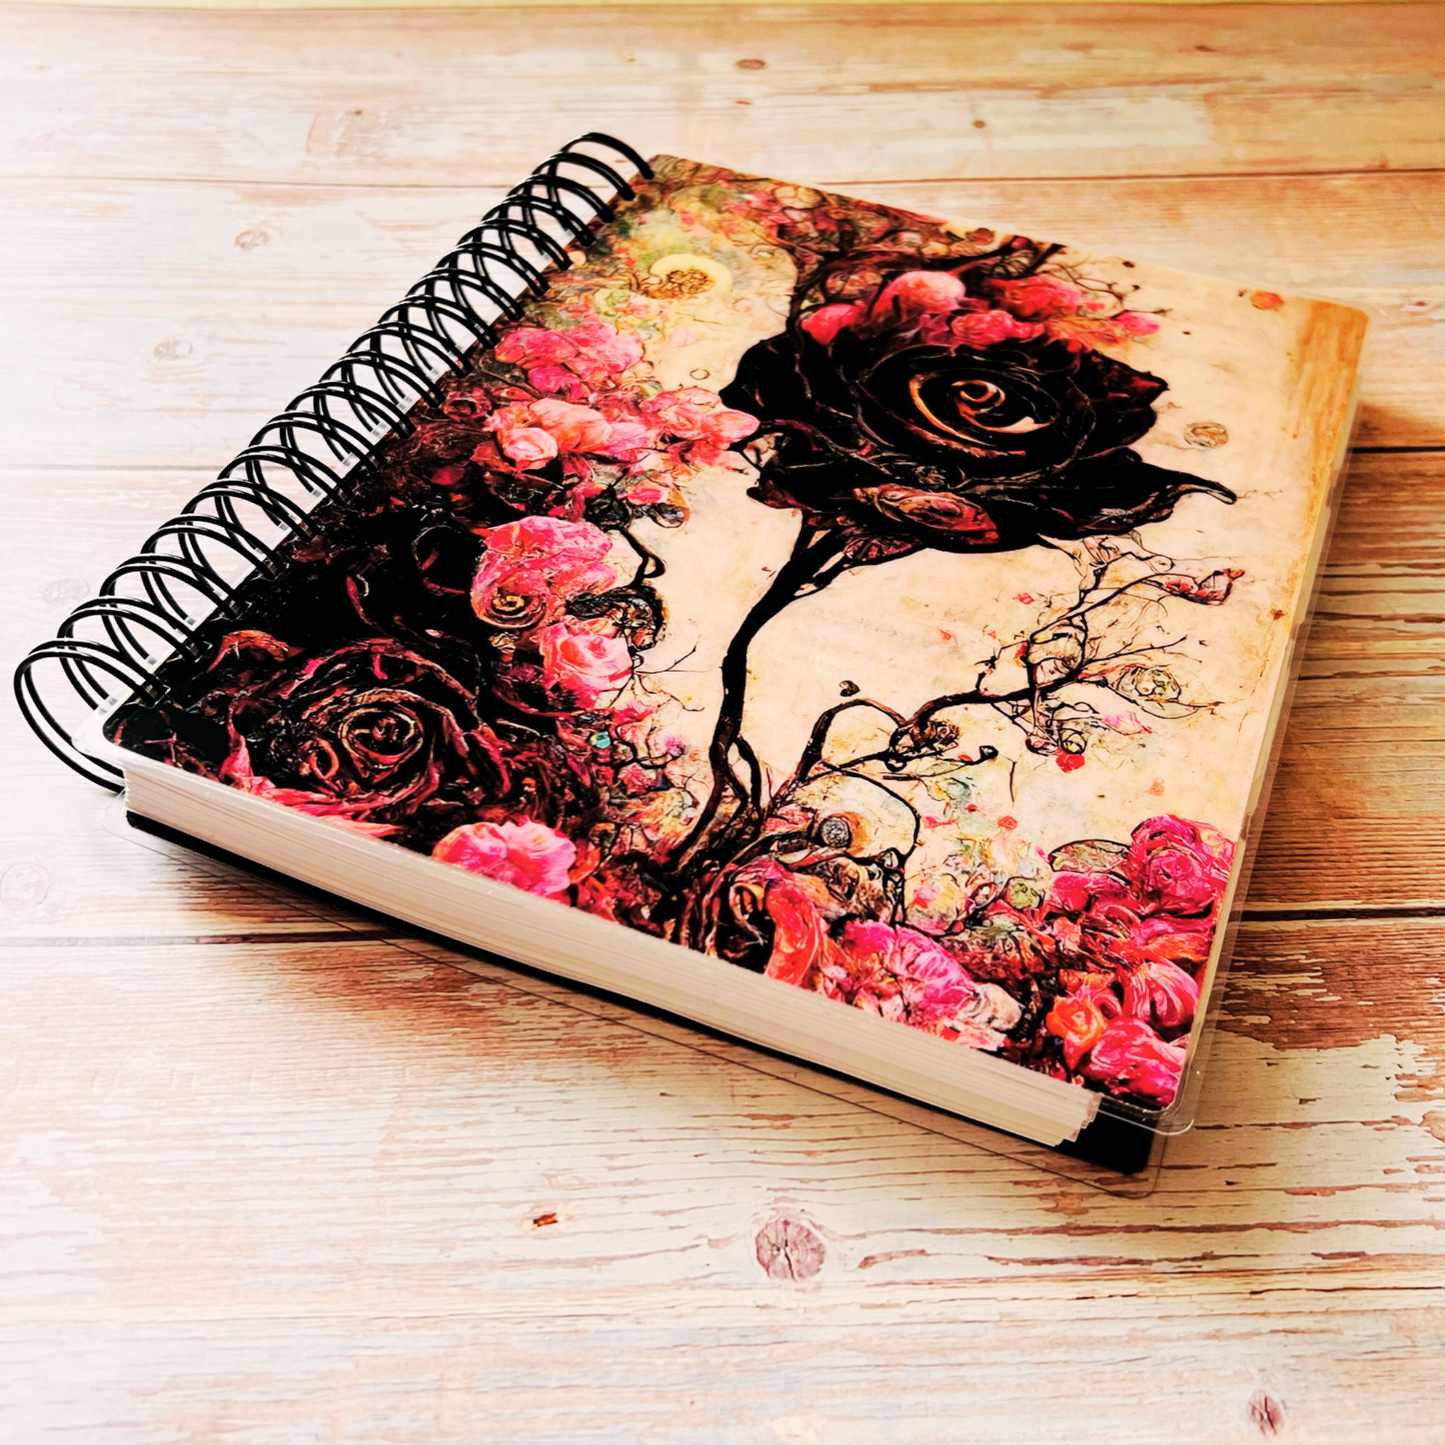 Personalized 6 Month Daily Planner 2023-2024 | Gothic Black Rose Daily Planners Artful Planner Co. 